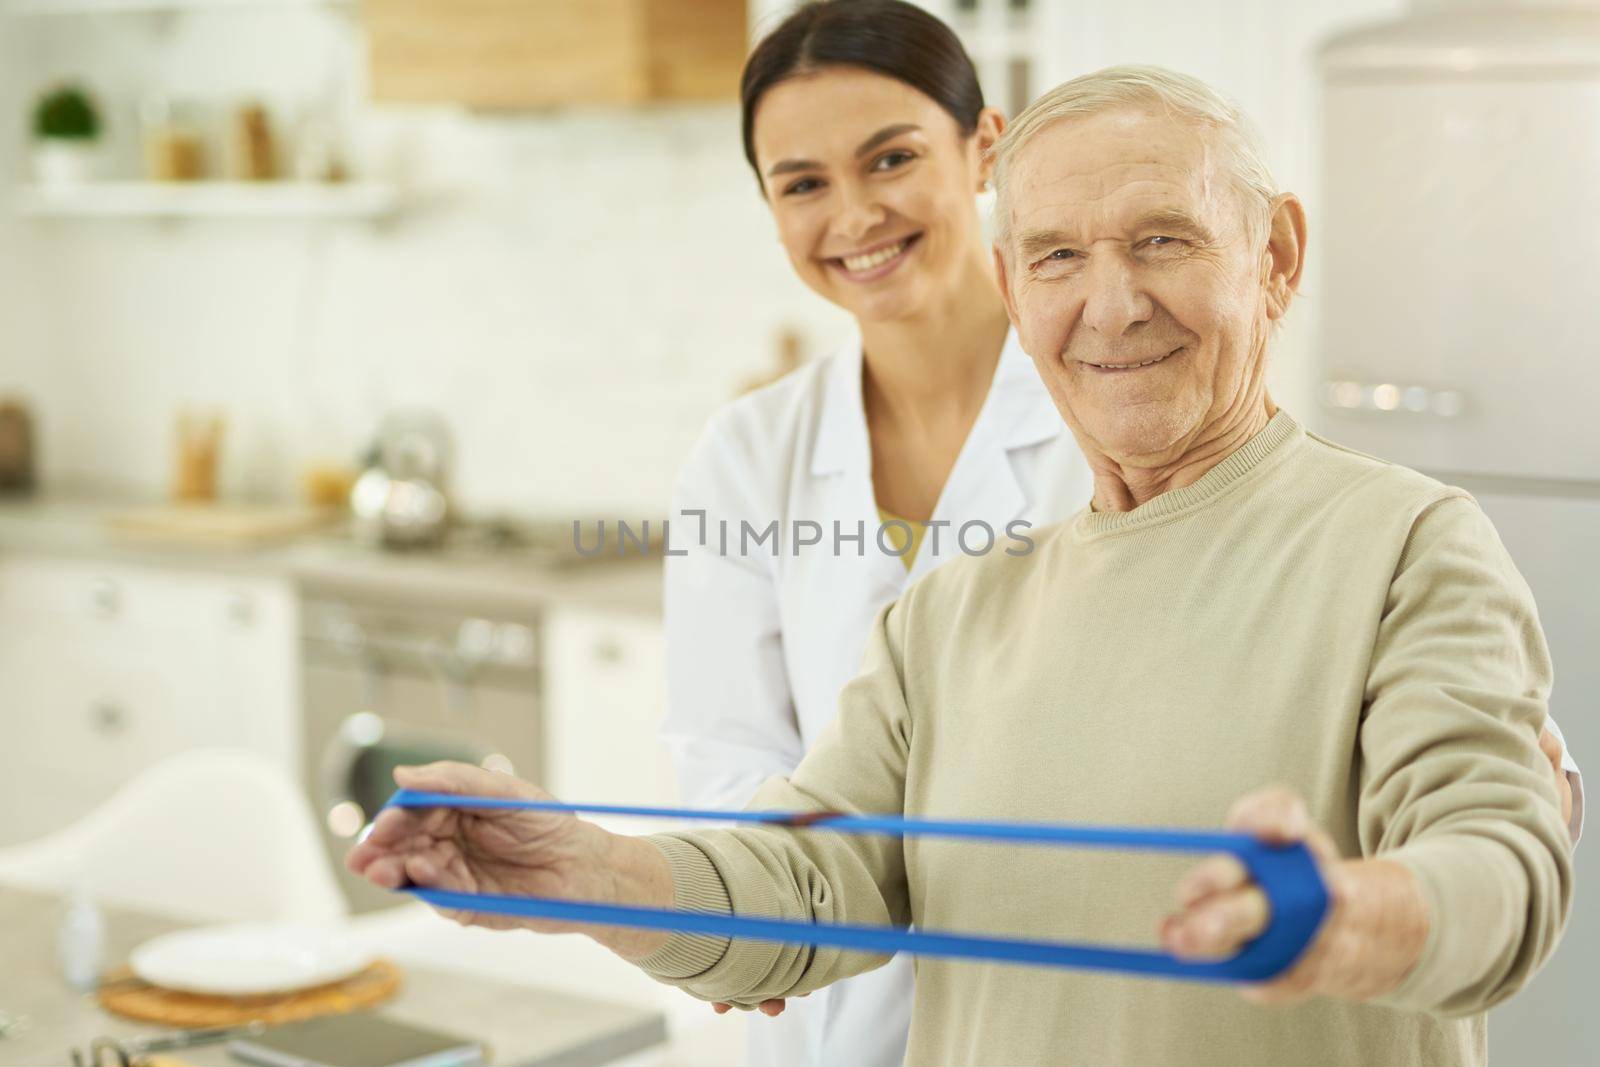 Happy senior citizen using fitness rubber band with female doctor in the background at home